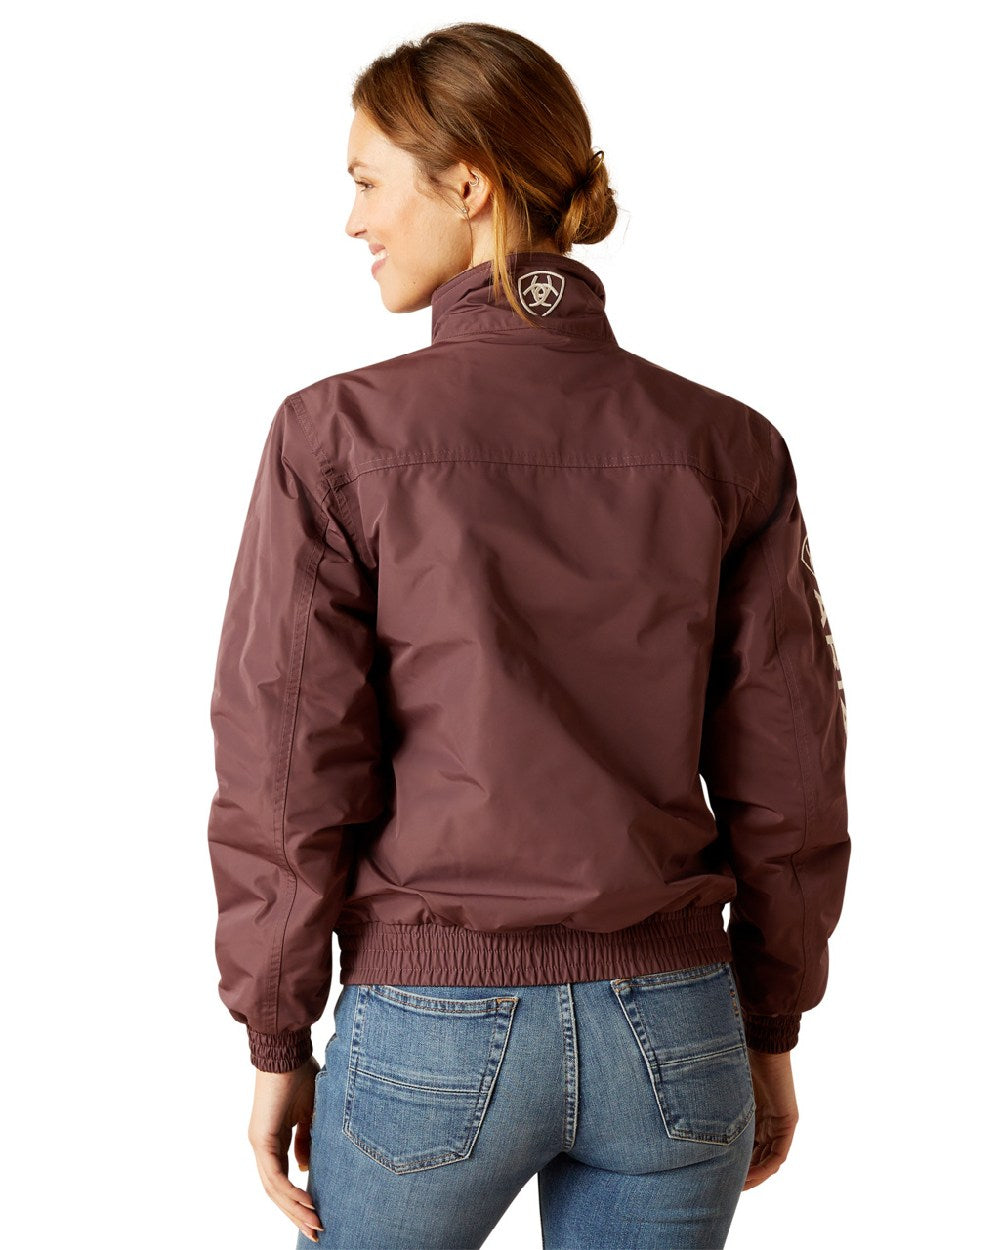 Ariat Womens Stable Insulated Jacket in Huckleberry 